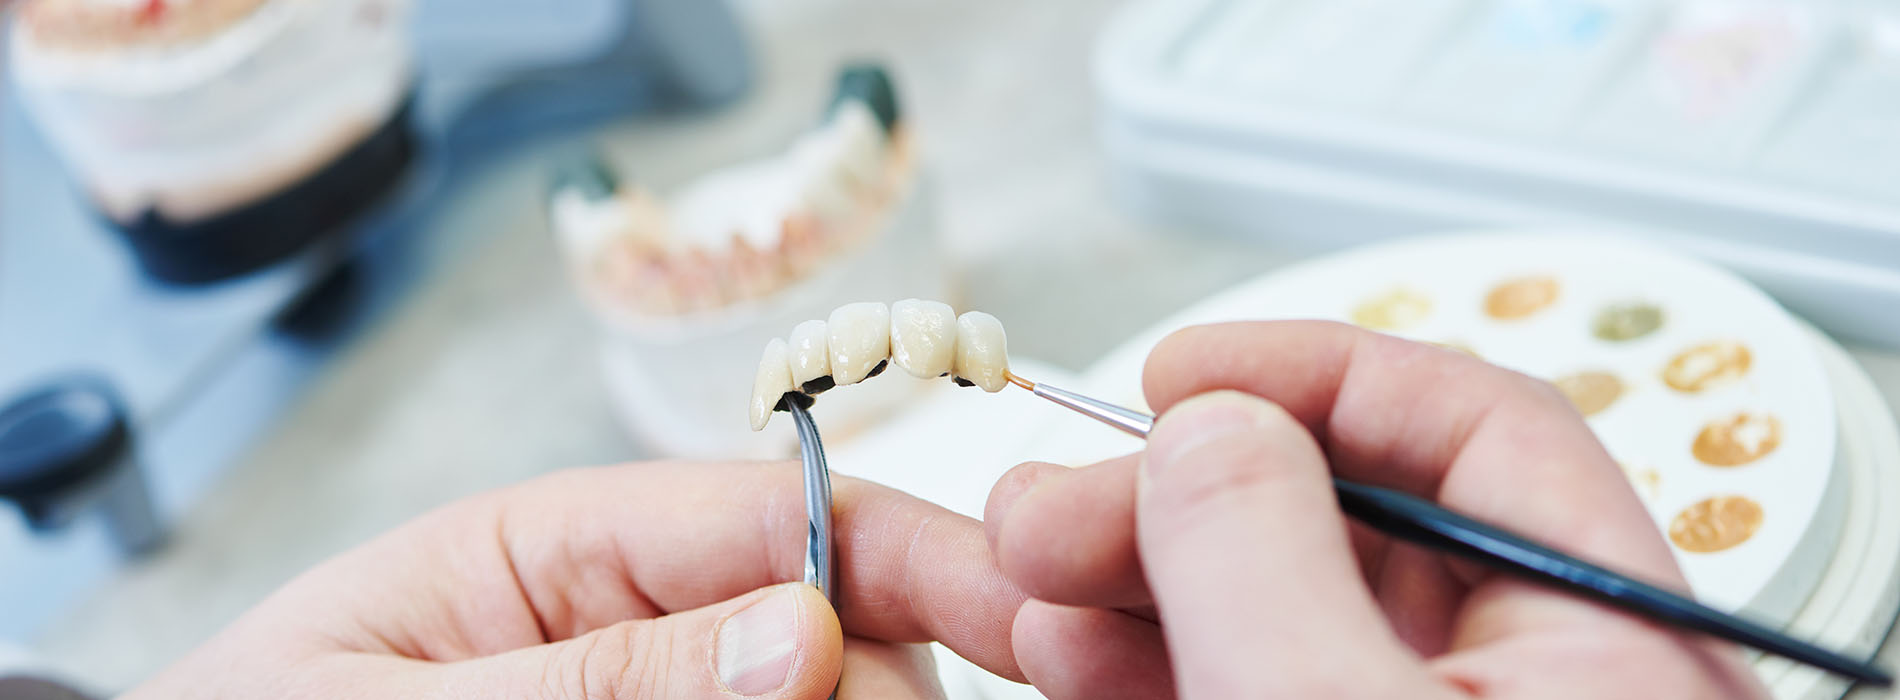 Mann Dental Care | Emergency Treatment, ZOOM  Whitening and Cosmetic Dentistry